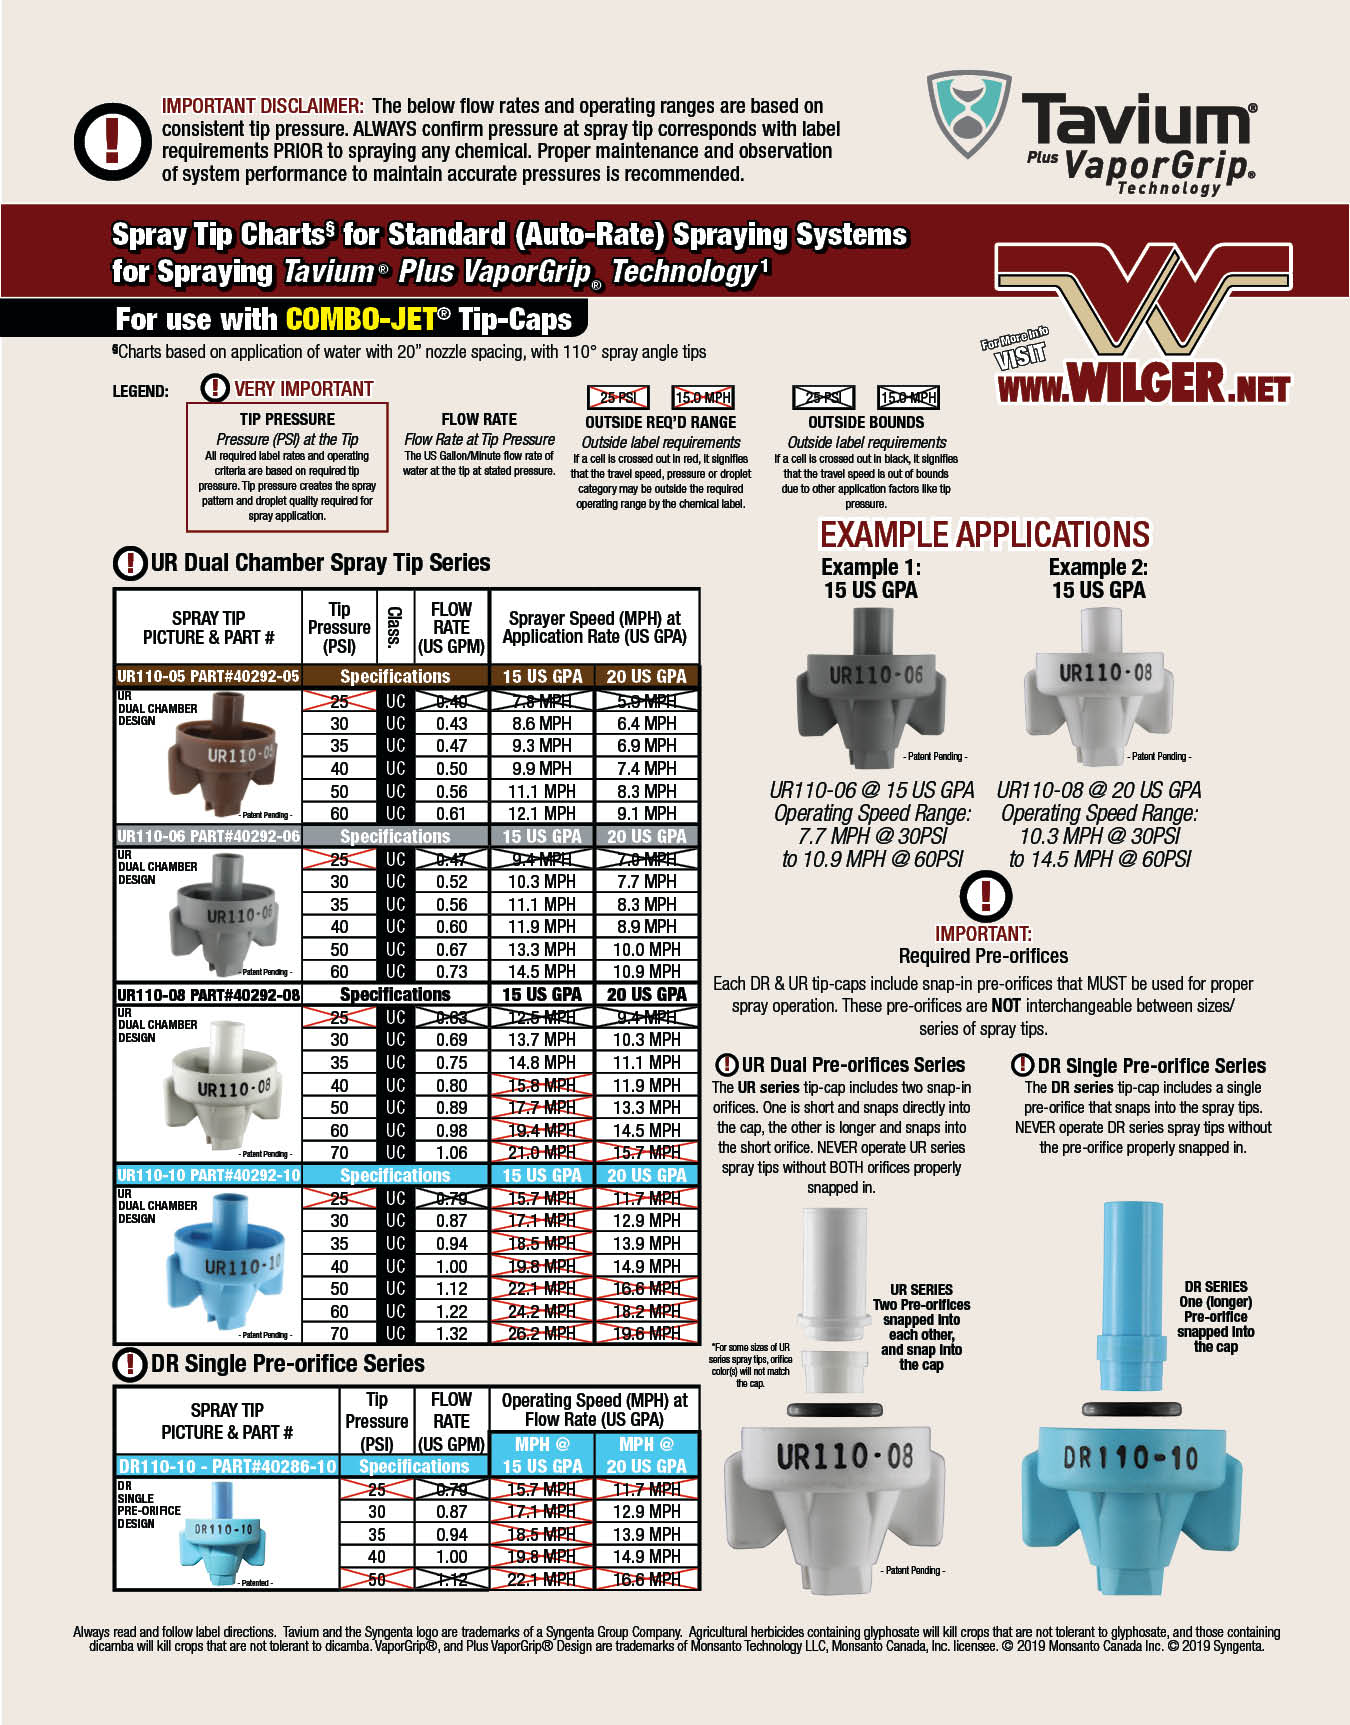 Tavium Spray Tip Charts for Auto-rate controlled sprayers